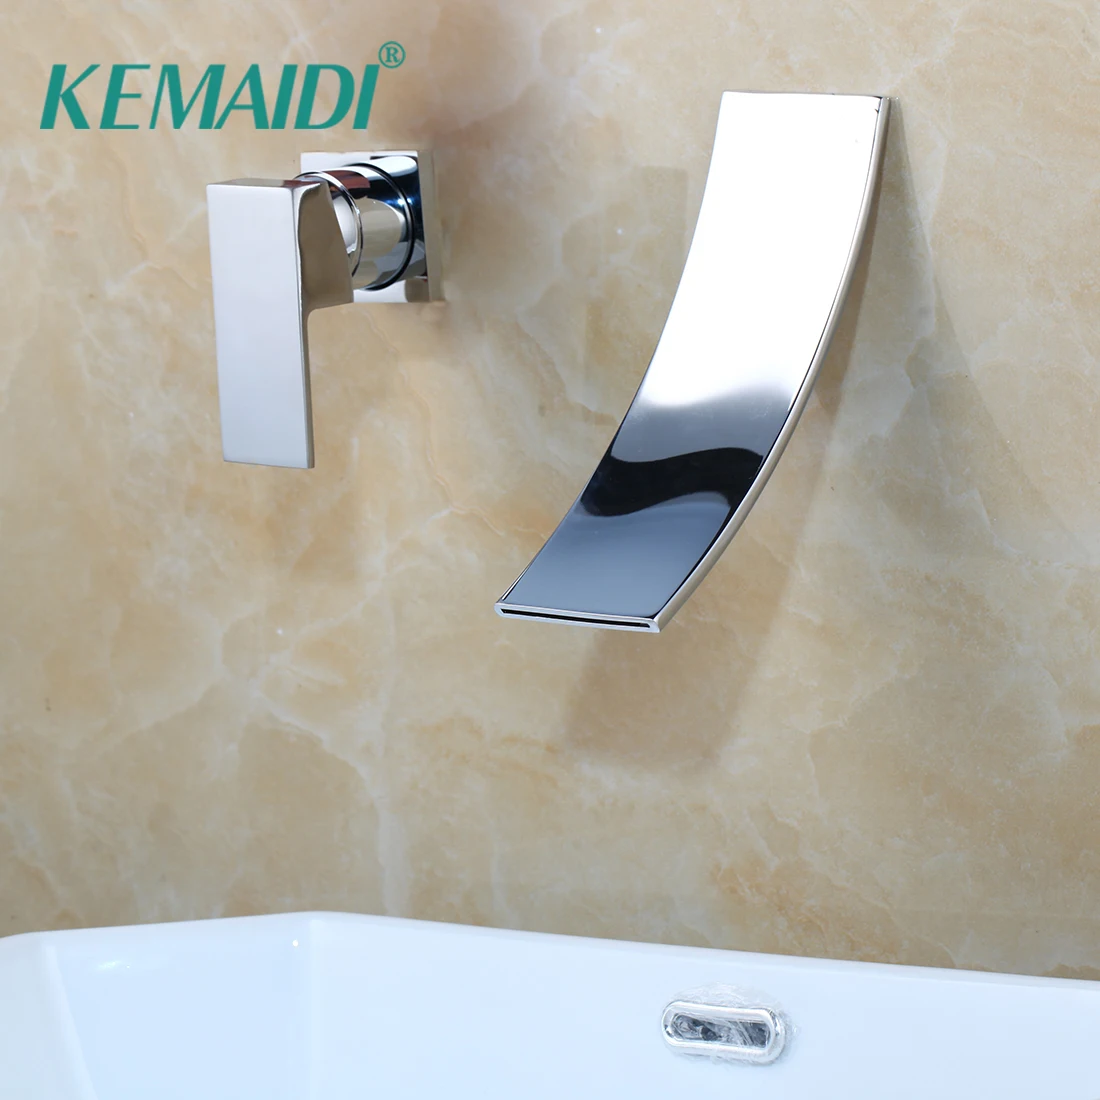 

KEMAIDI Wall Mounted Waterfall Bathroom Faucet Chrome Brass Spout Vanity Sink Mixer Tap Longer Style